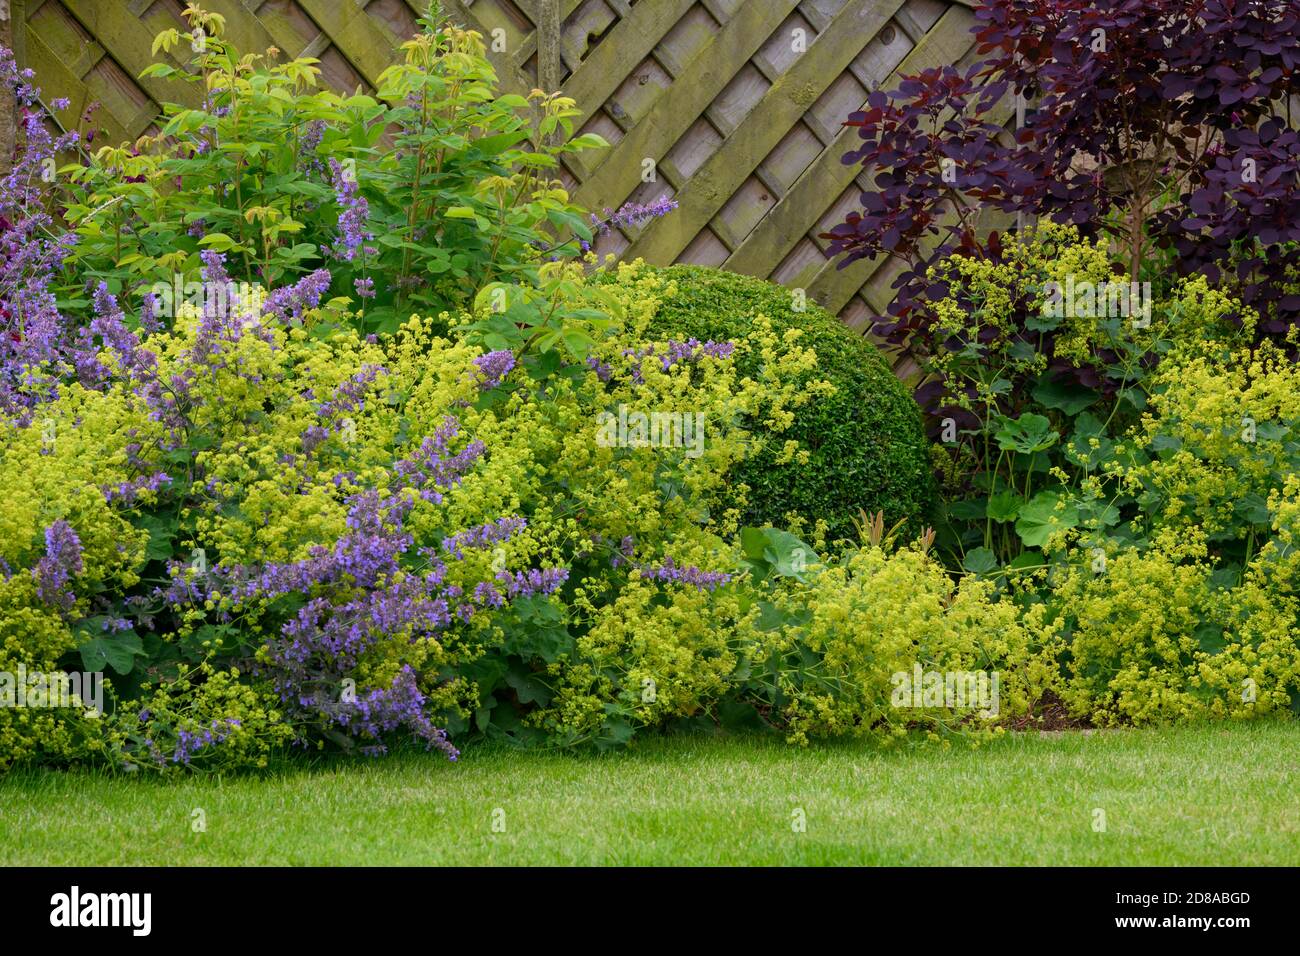 Landscaped private garden close-up (cottage design, summer flowers, mixed border plants, shrubs, colourful foliage, fence) - Yorkshire, England, UK. Stock Photo